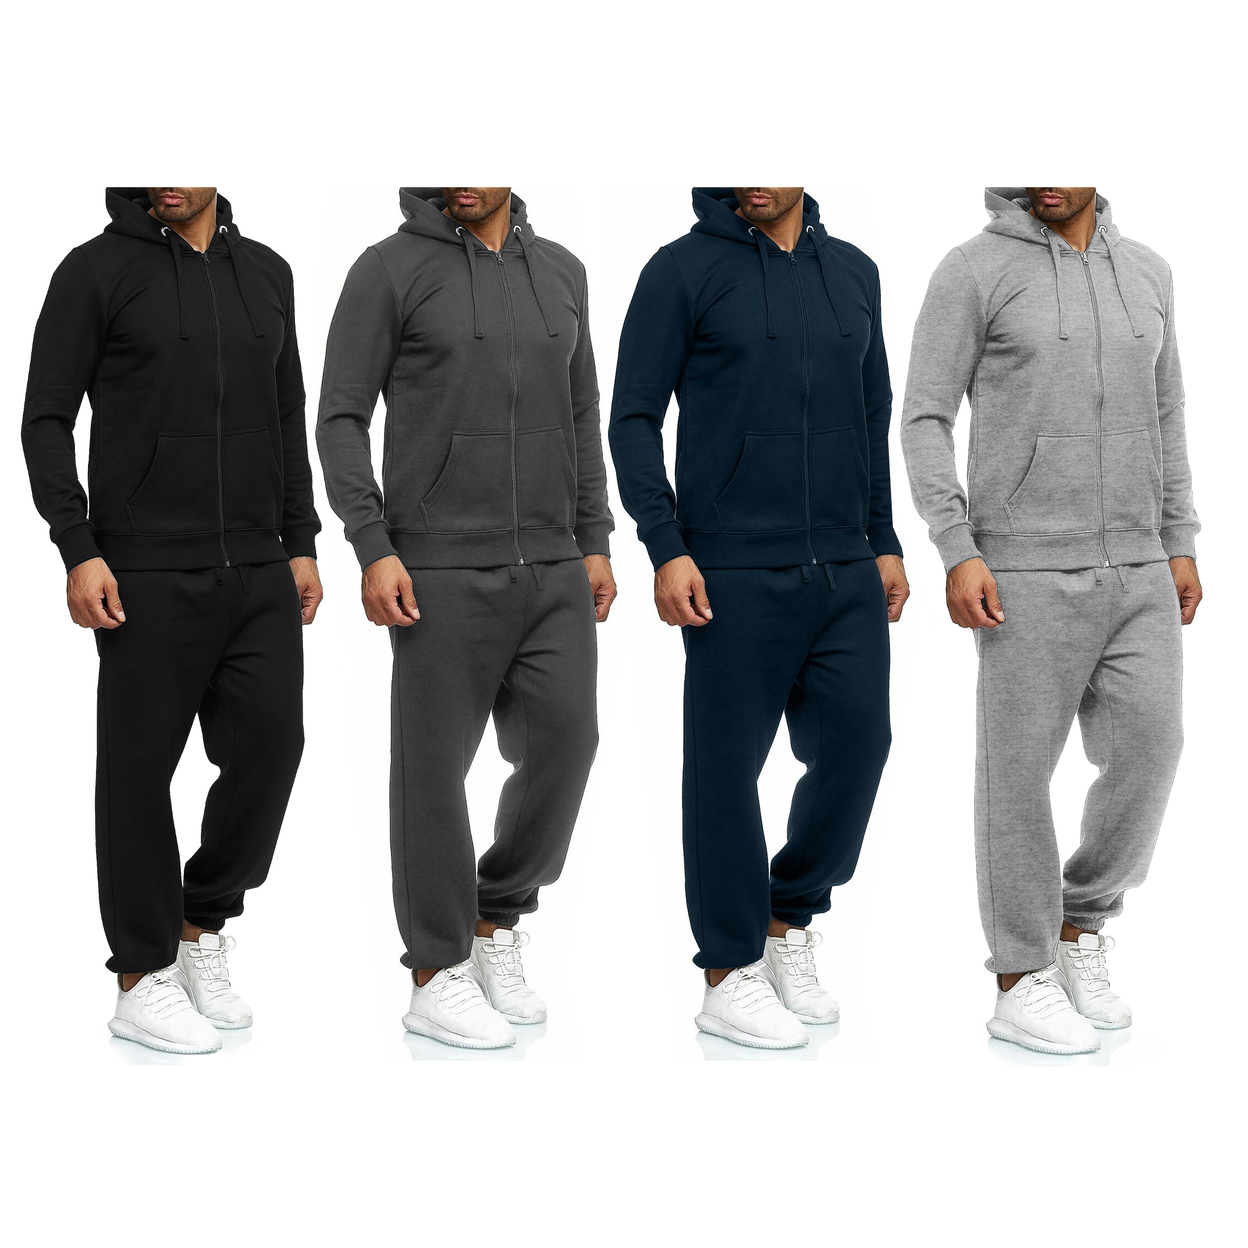 Multi-Pack: Men's Casual Big & Tall Athletic Active Winter Warm Fleece Lined Full Zip Tracksuit Jogger Set - Navy, 1-pack, 3xl